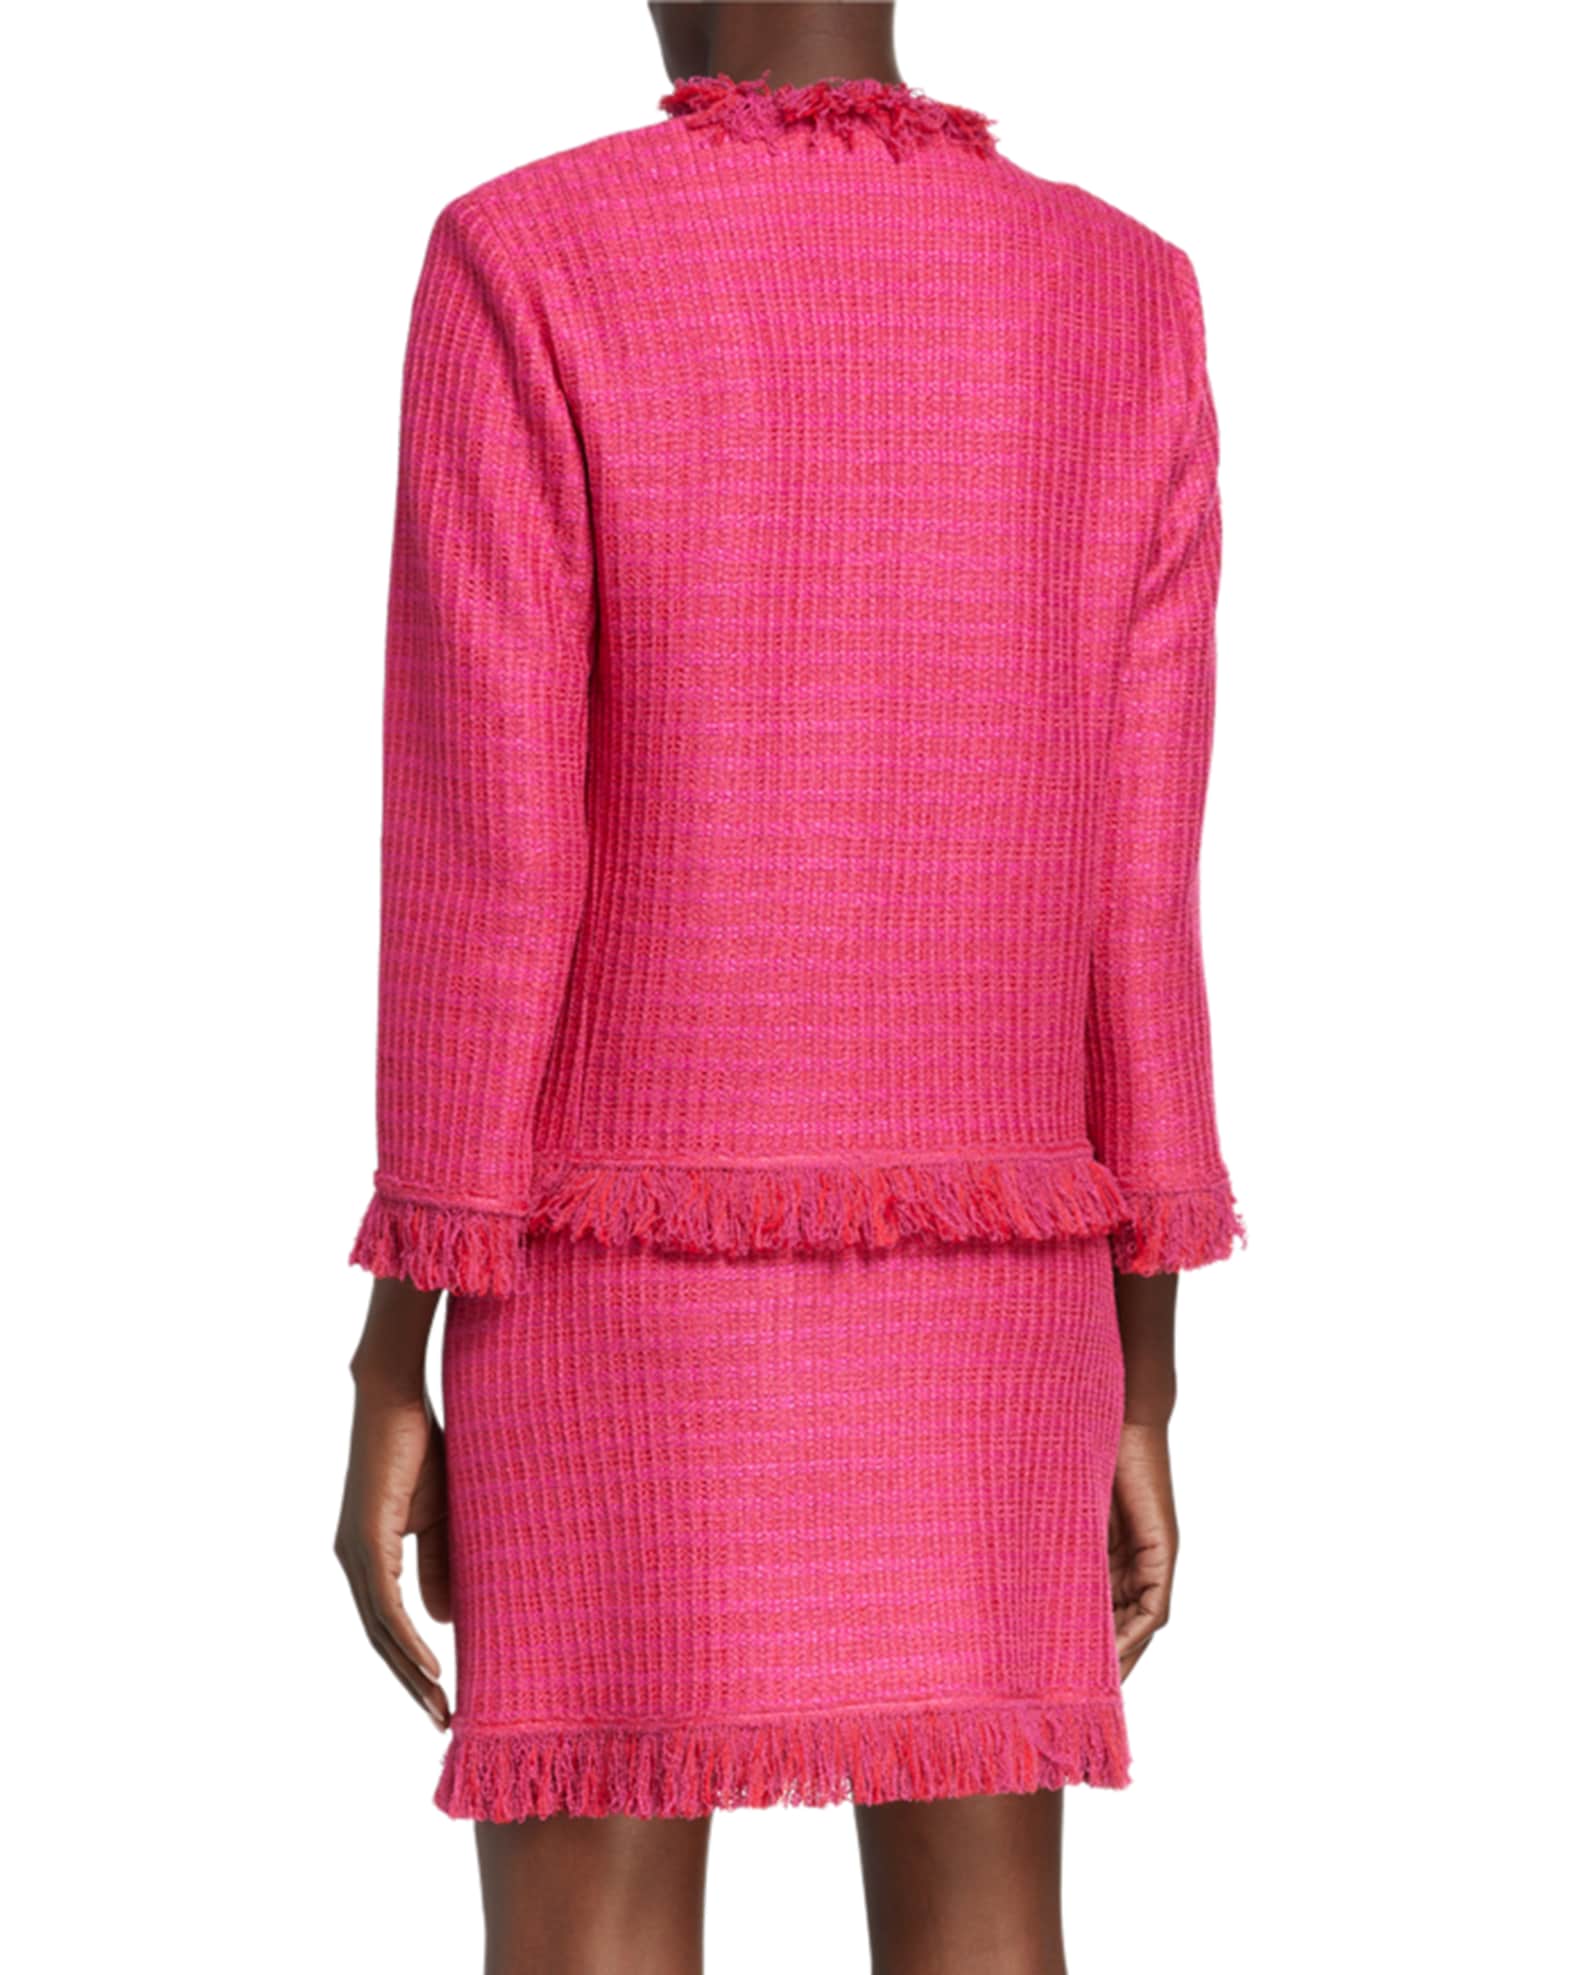 Poppy Textured 3/4-Sleeve Jacket and Matching Items | Neiman Marcus